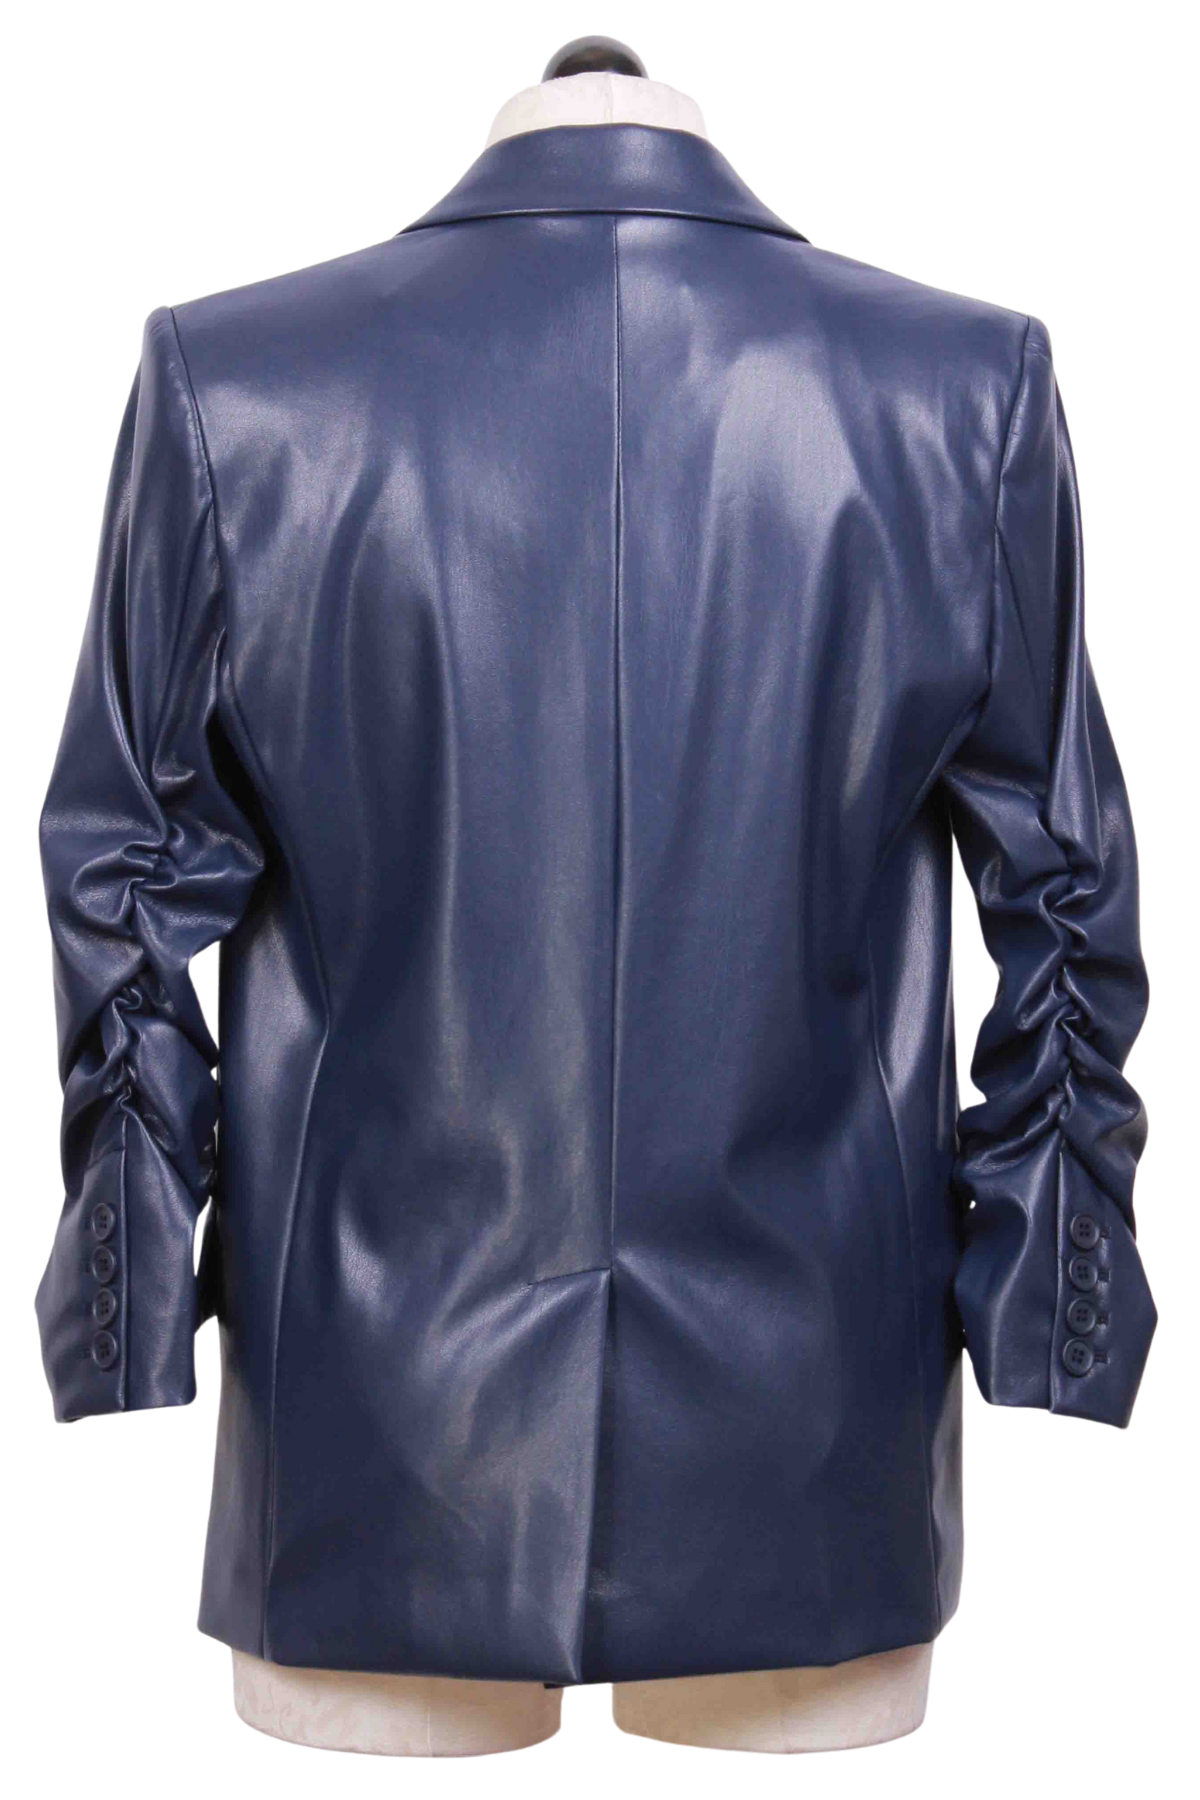 back iew of Navy Millie Vegan Leather Blazer by Generation Love